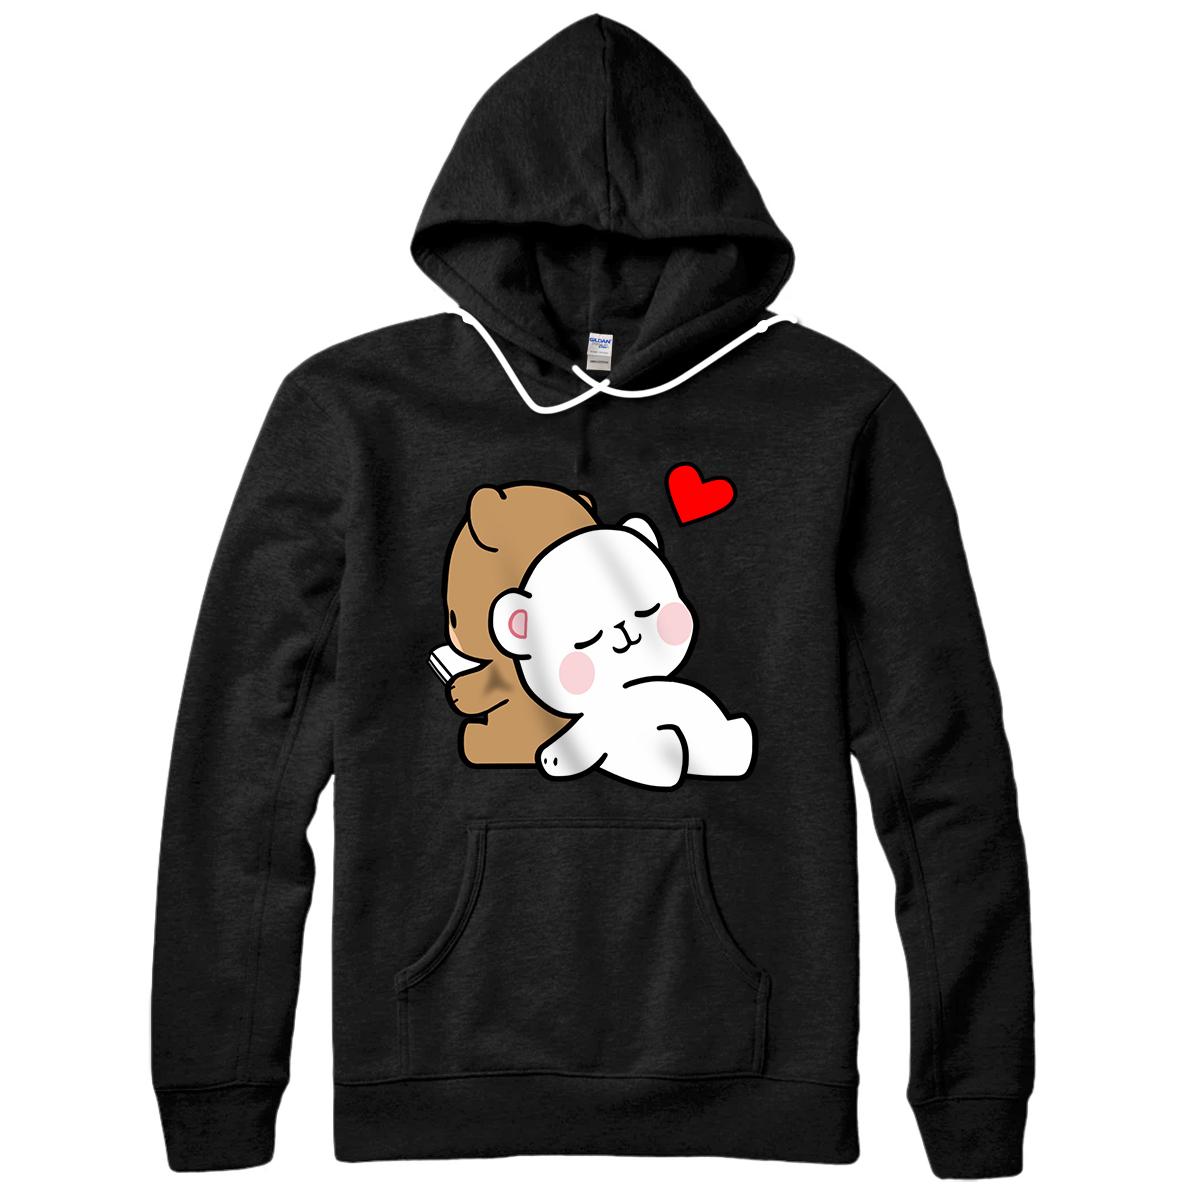 Personalized Cute Milk Mocha Bedtime Story Always Kiss Me Goodnight Love Pullover Hoodie